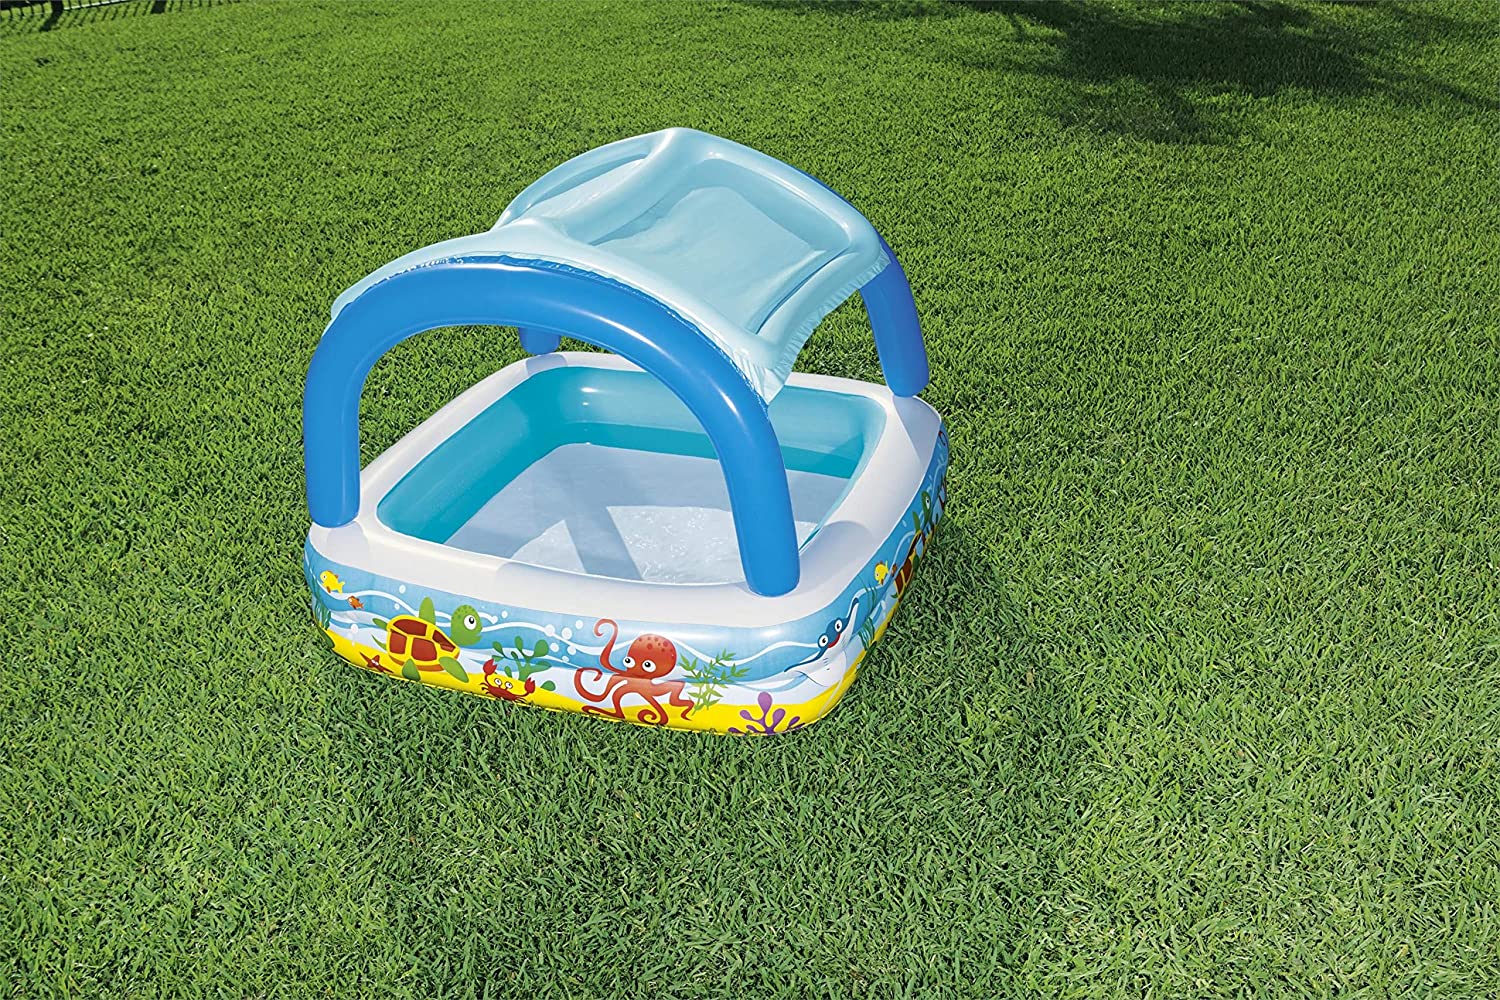 147cm x 147cm Bestway Sea Design Kids Play Paddling Pool with Removable Canopy